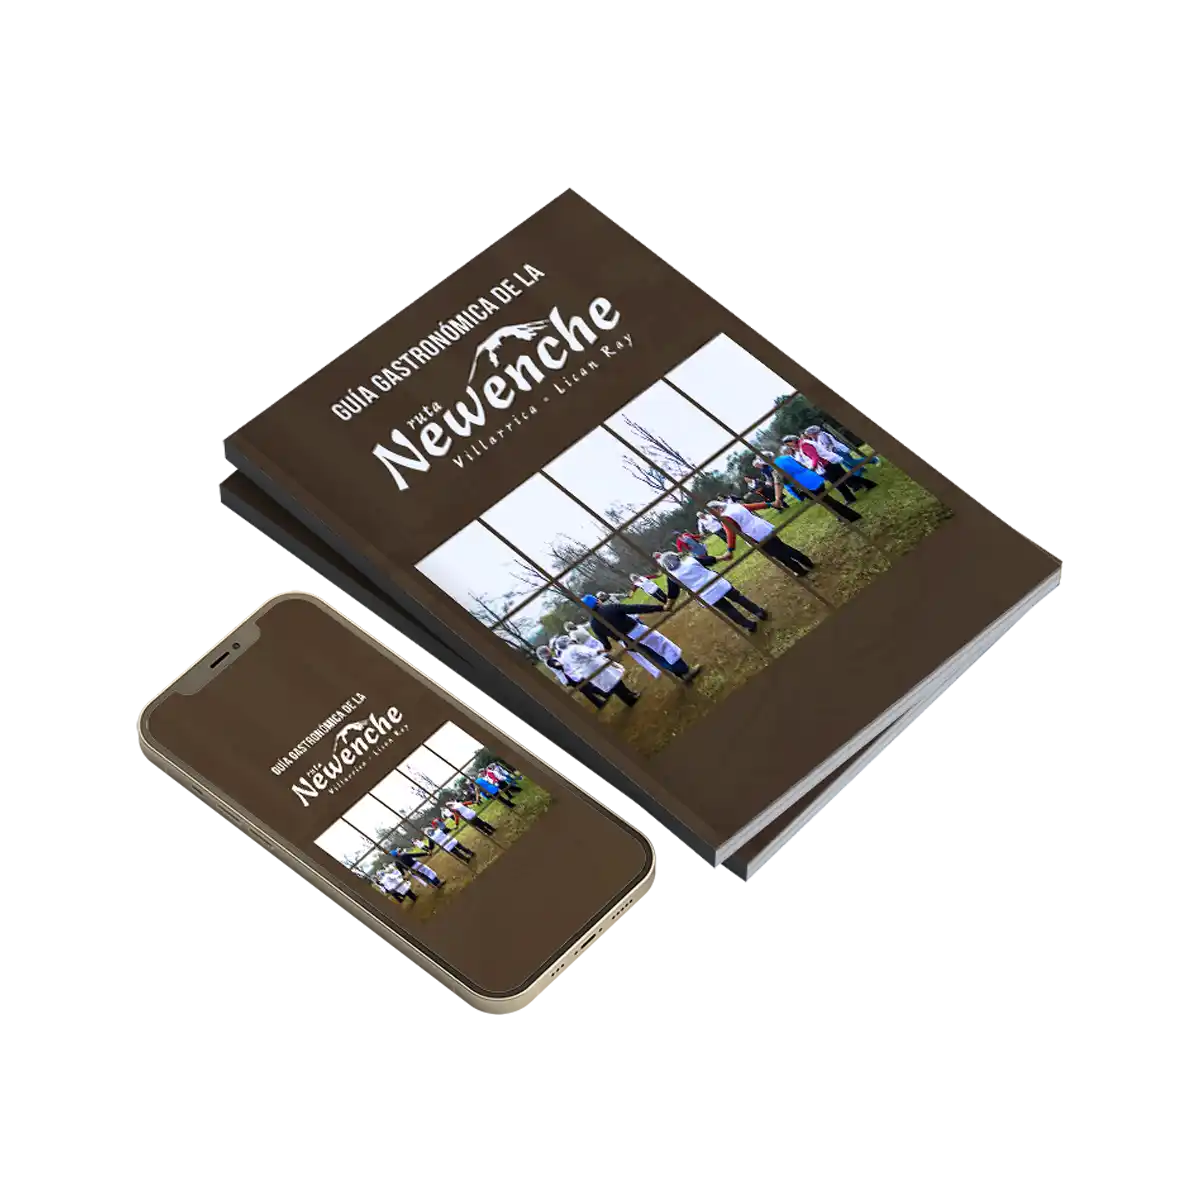 Cover of Libro Newenche eBook shown in print and phone formats.